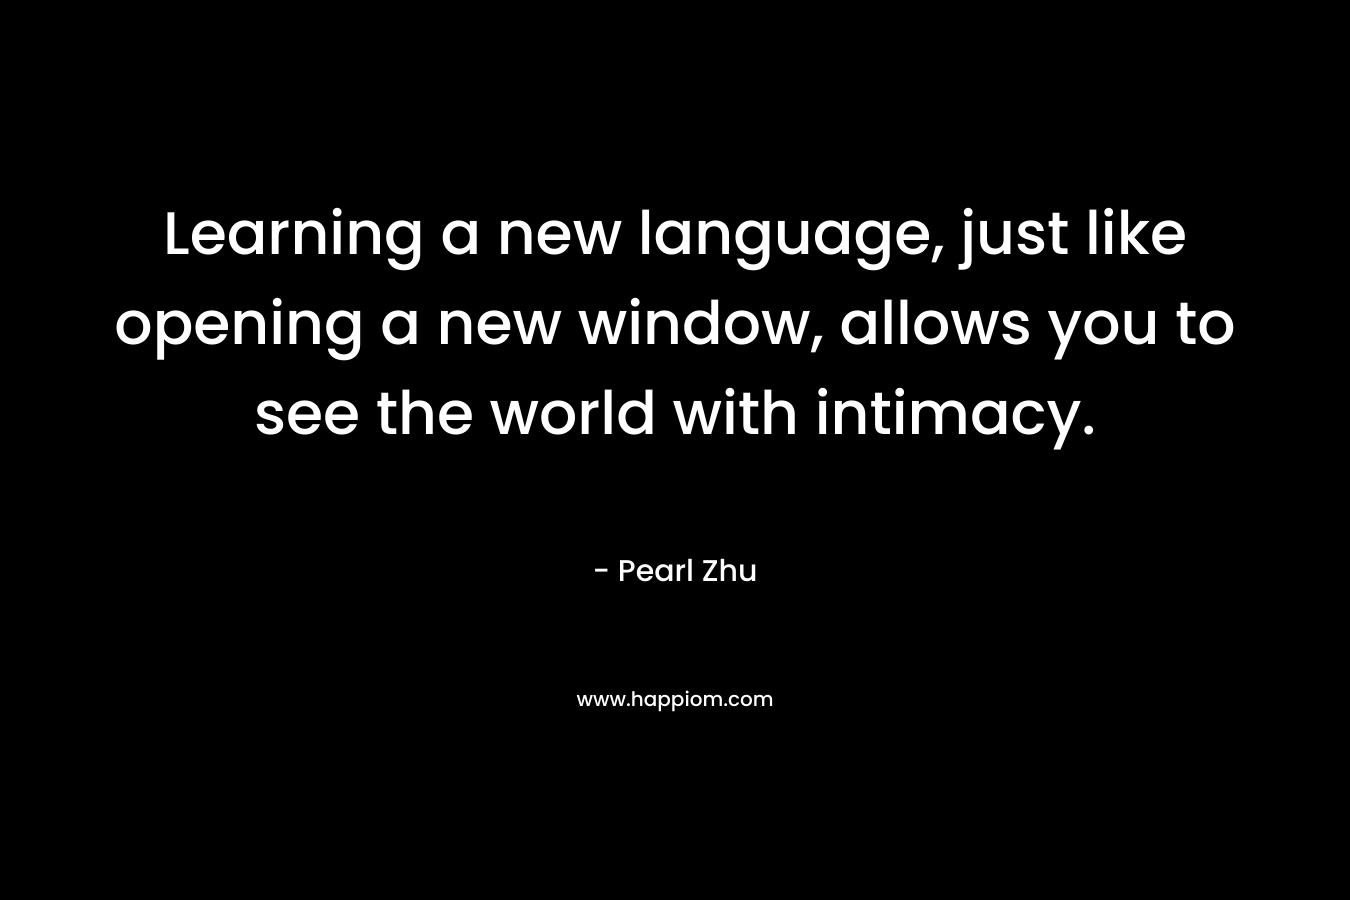 Learning a new language, just like opening a new window, allows you to see the world with intimacy. – Pearl Zhu